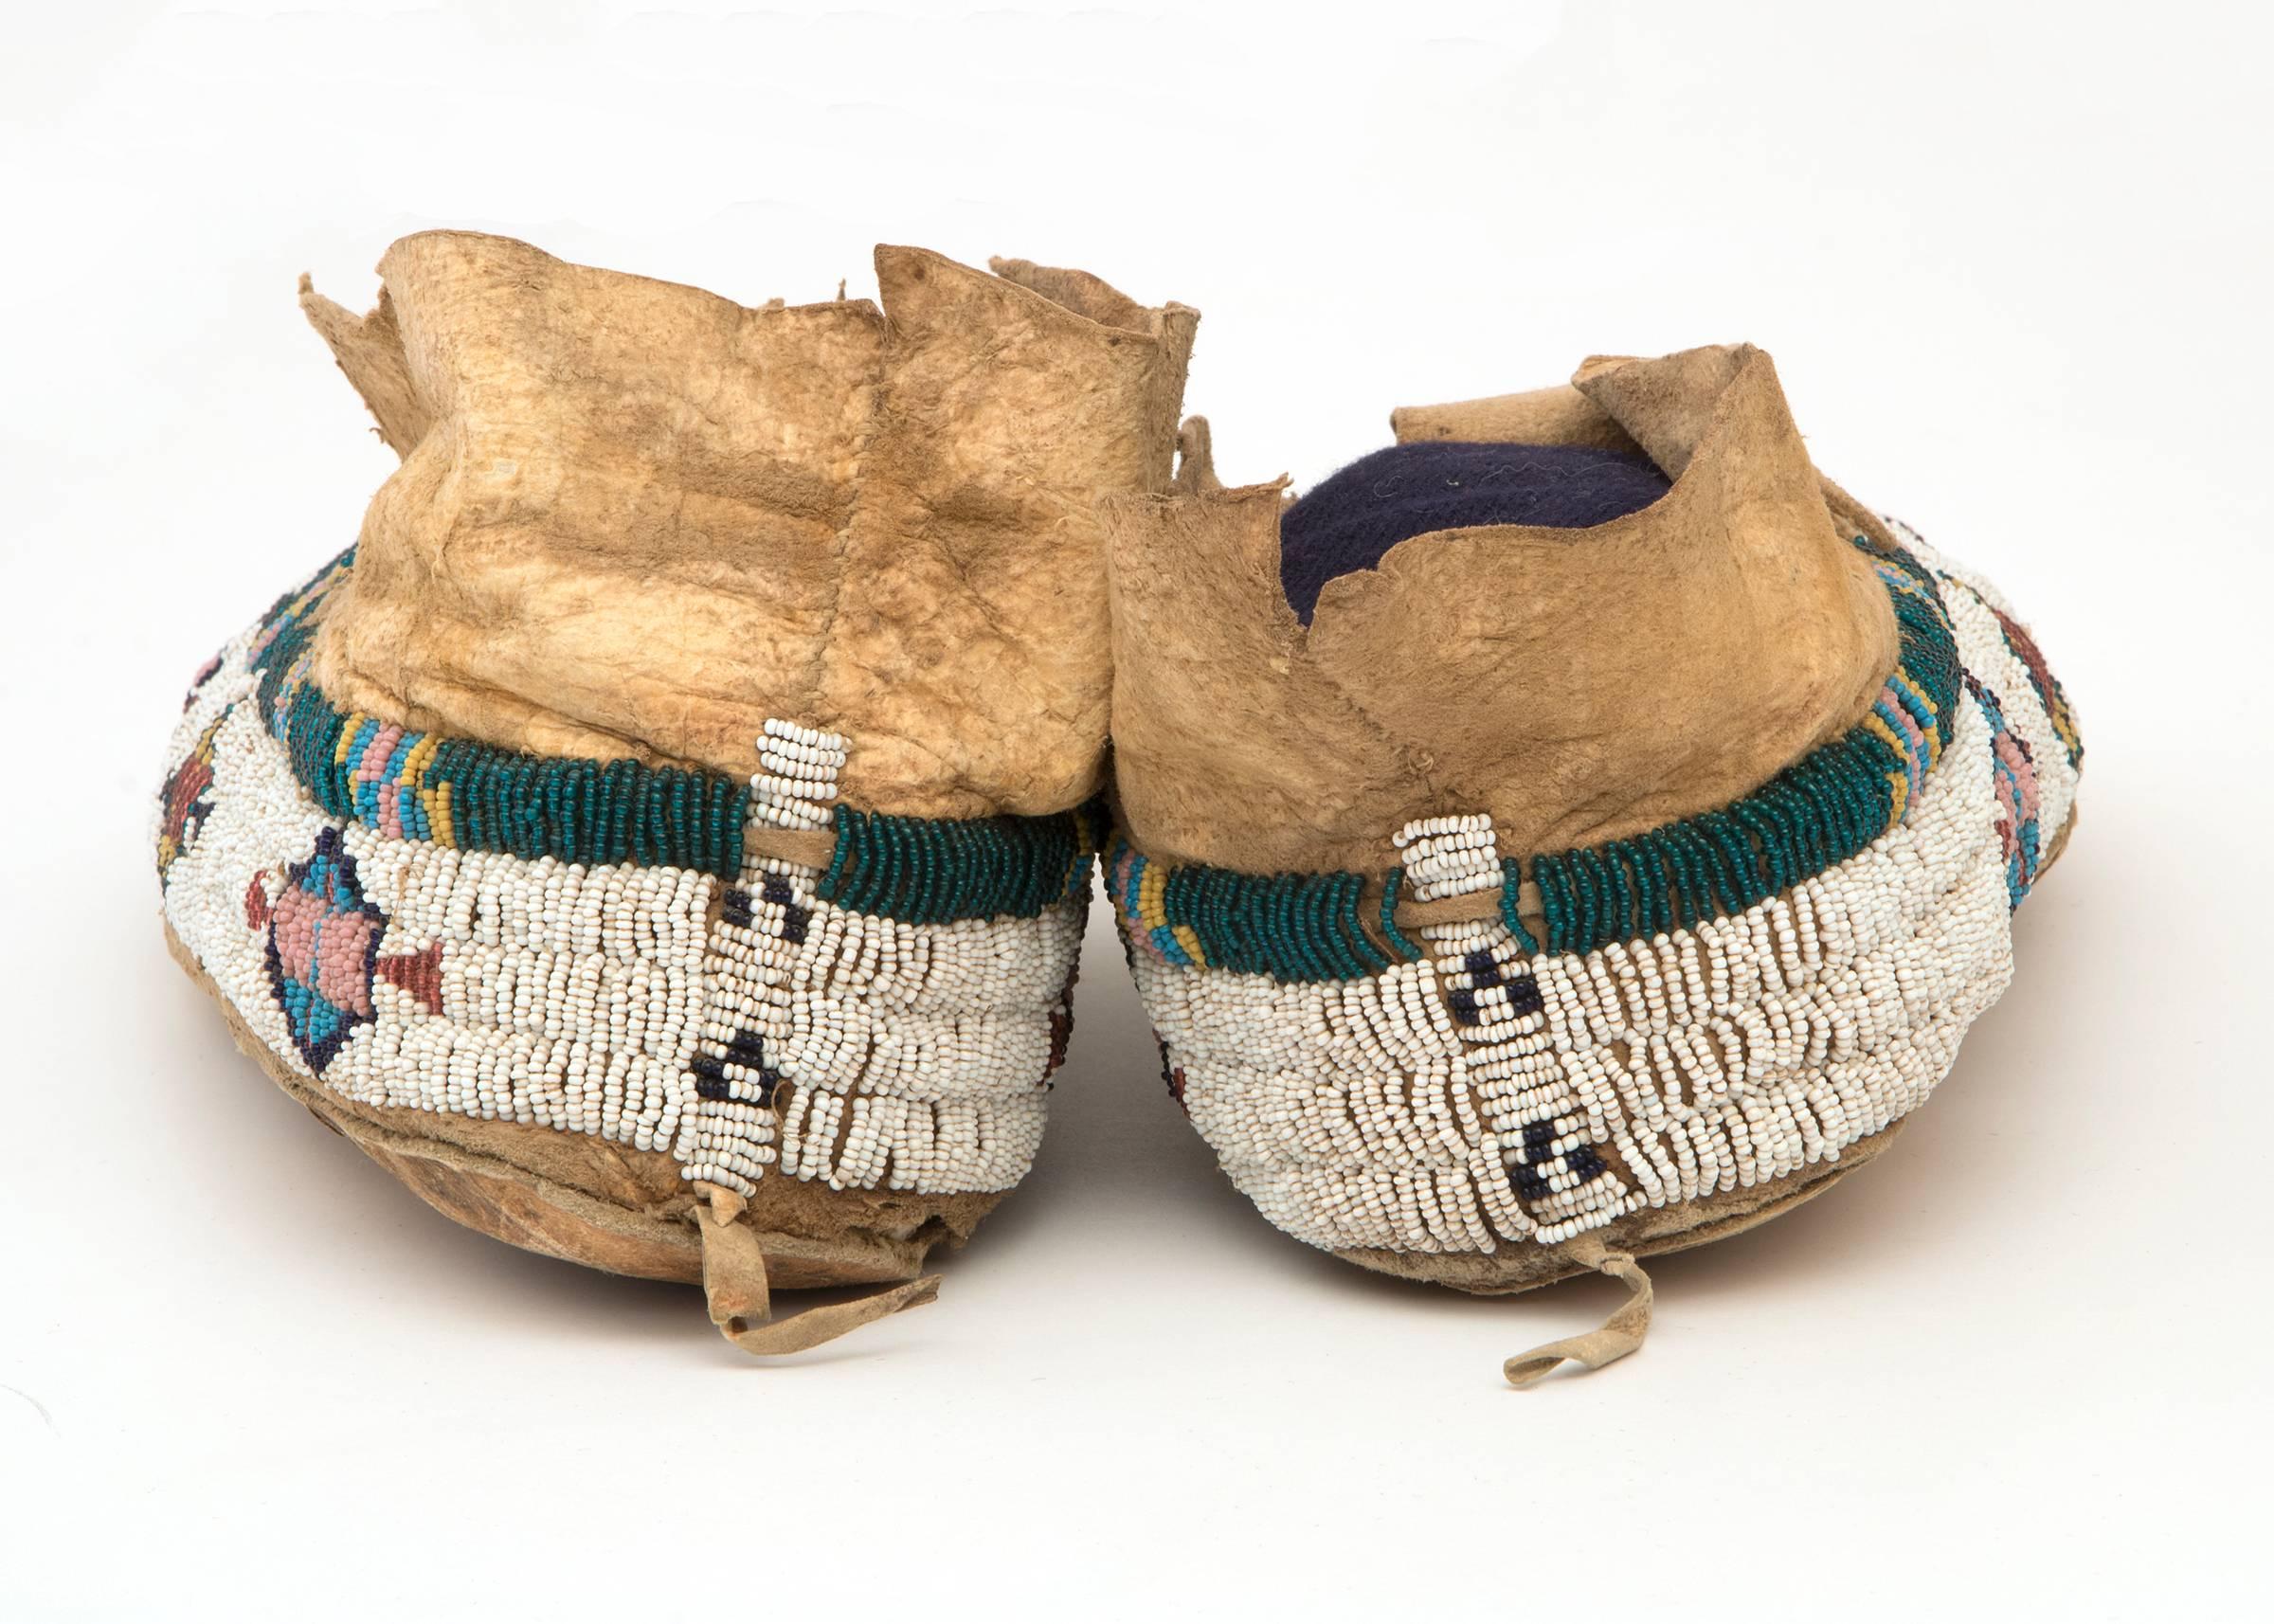 Pictorial beaded moccasins constructed of native tanned hide with glass trade beads. Design elements include stylized buffalo tracks, geometric elements and avian/humanoid figures.

Expedited and International shipping is available, please contact